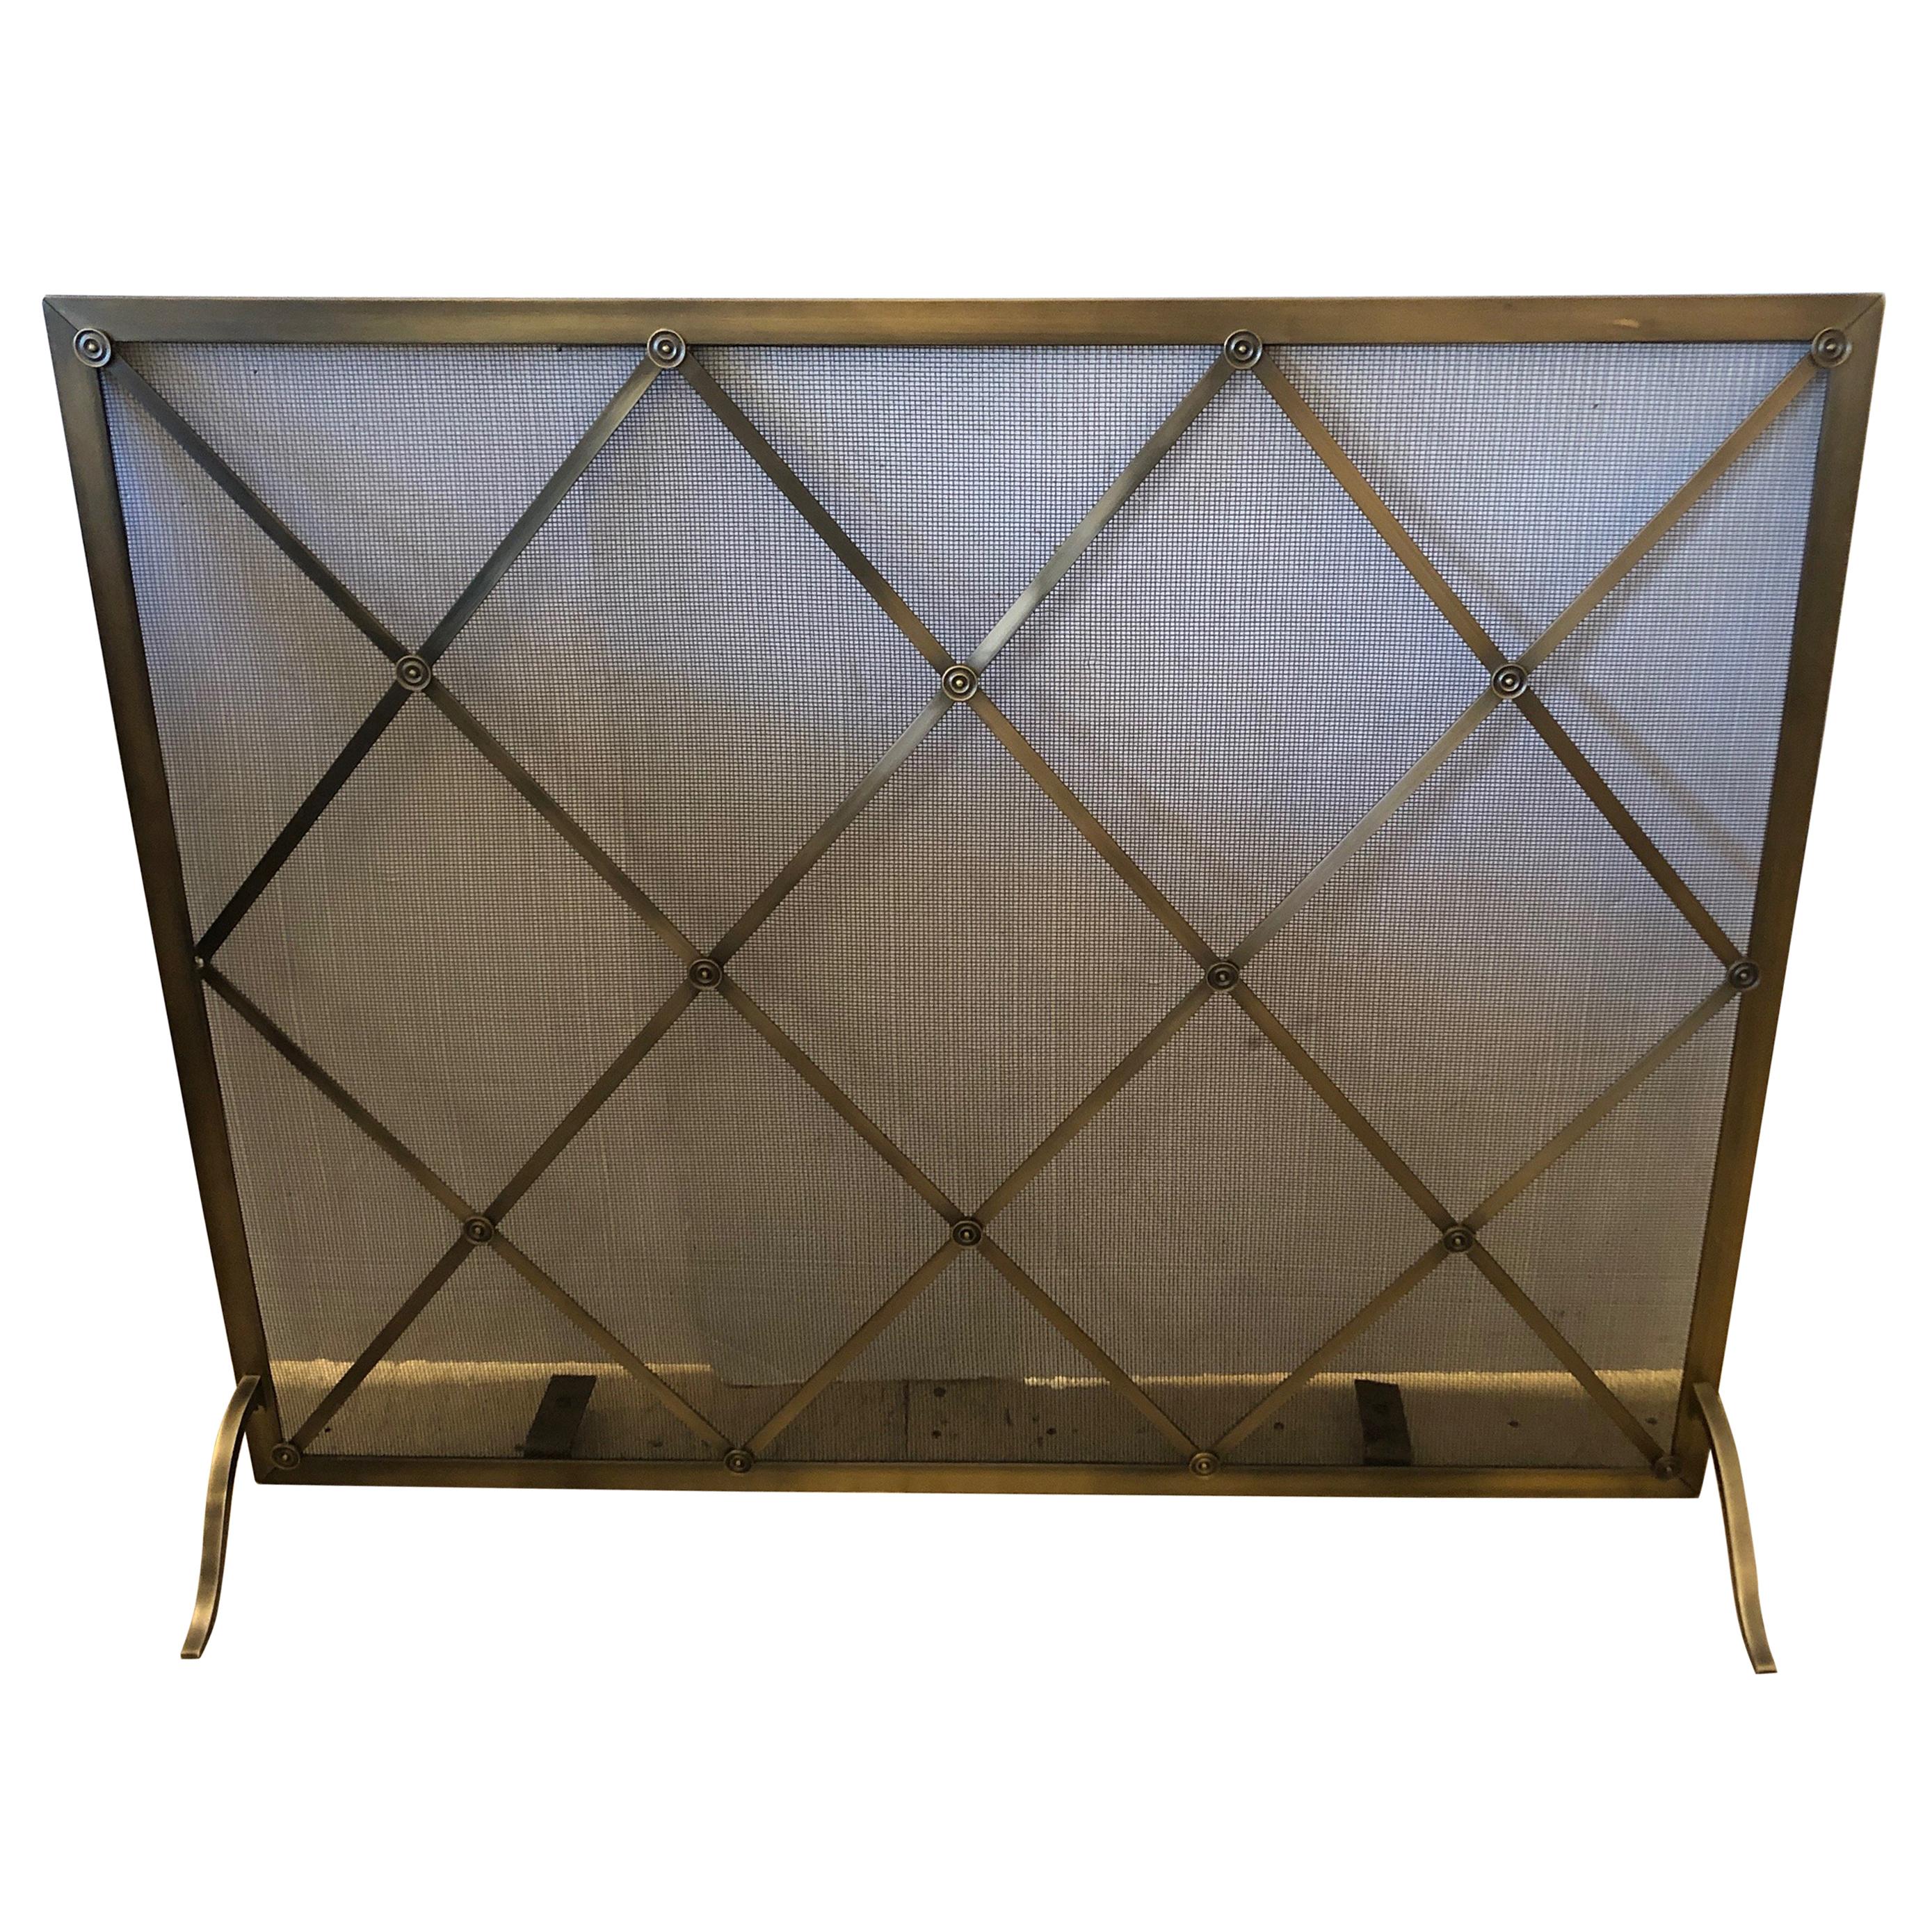  Large Mid Century Brass & Iron Mesh Fireplace Screen in Manner of Jean Royere